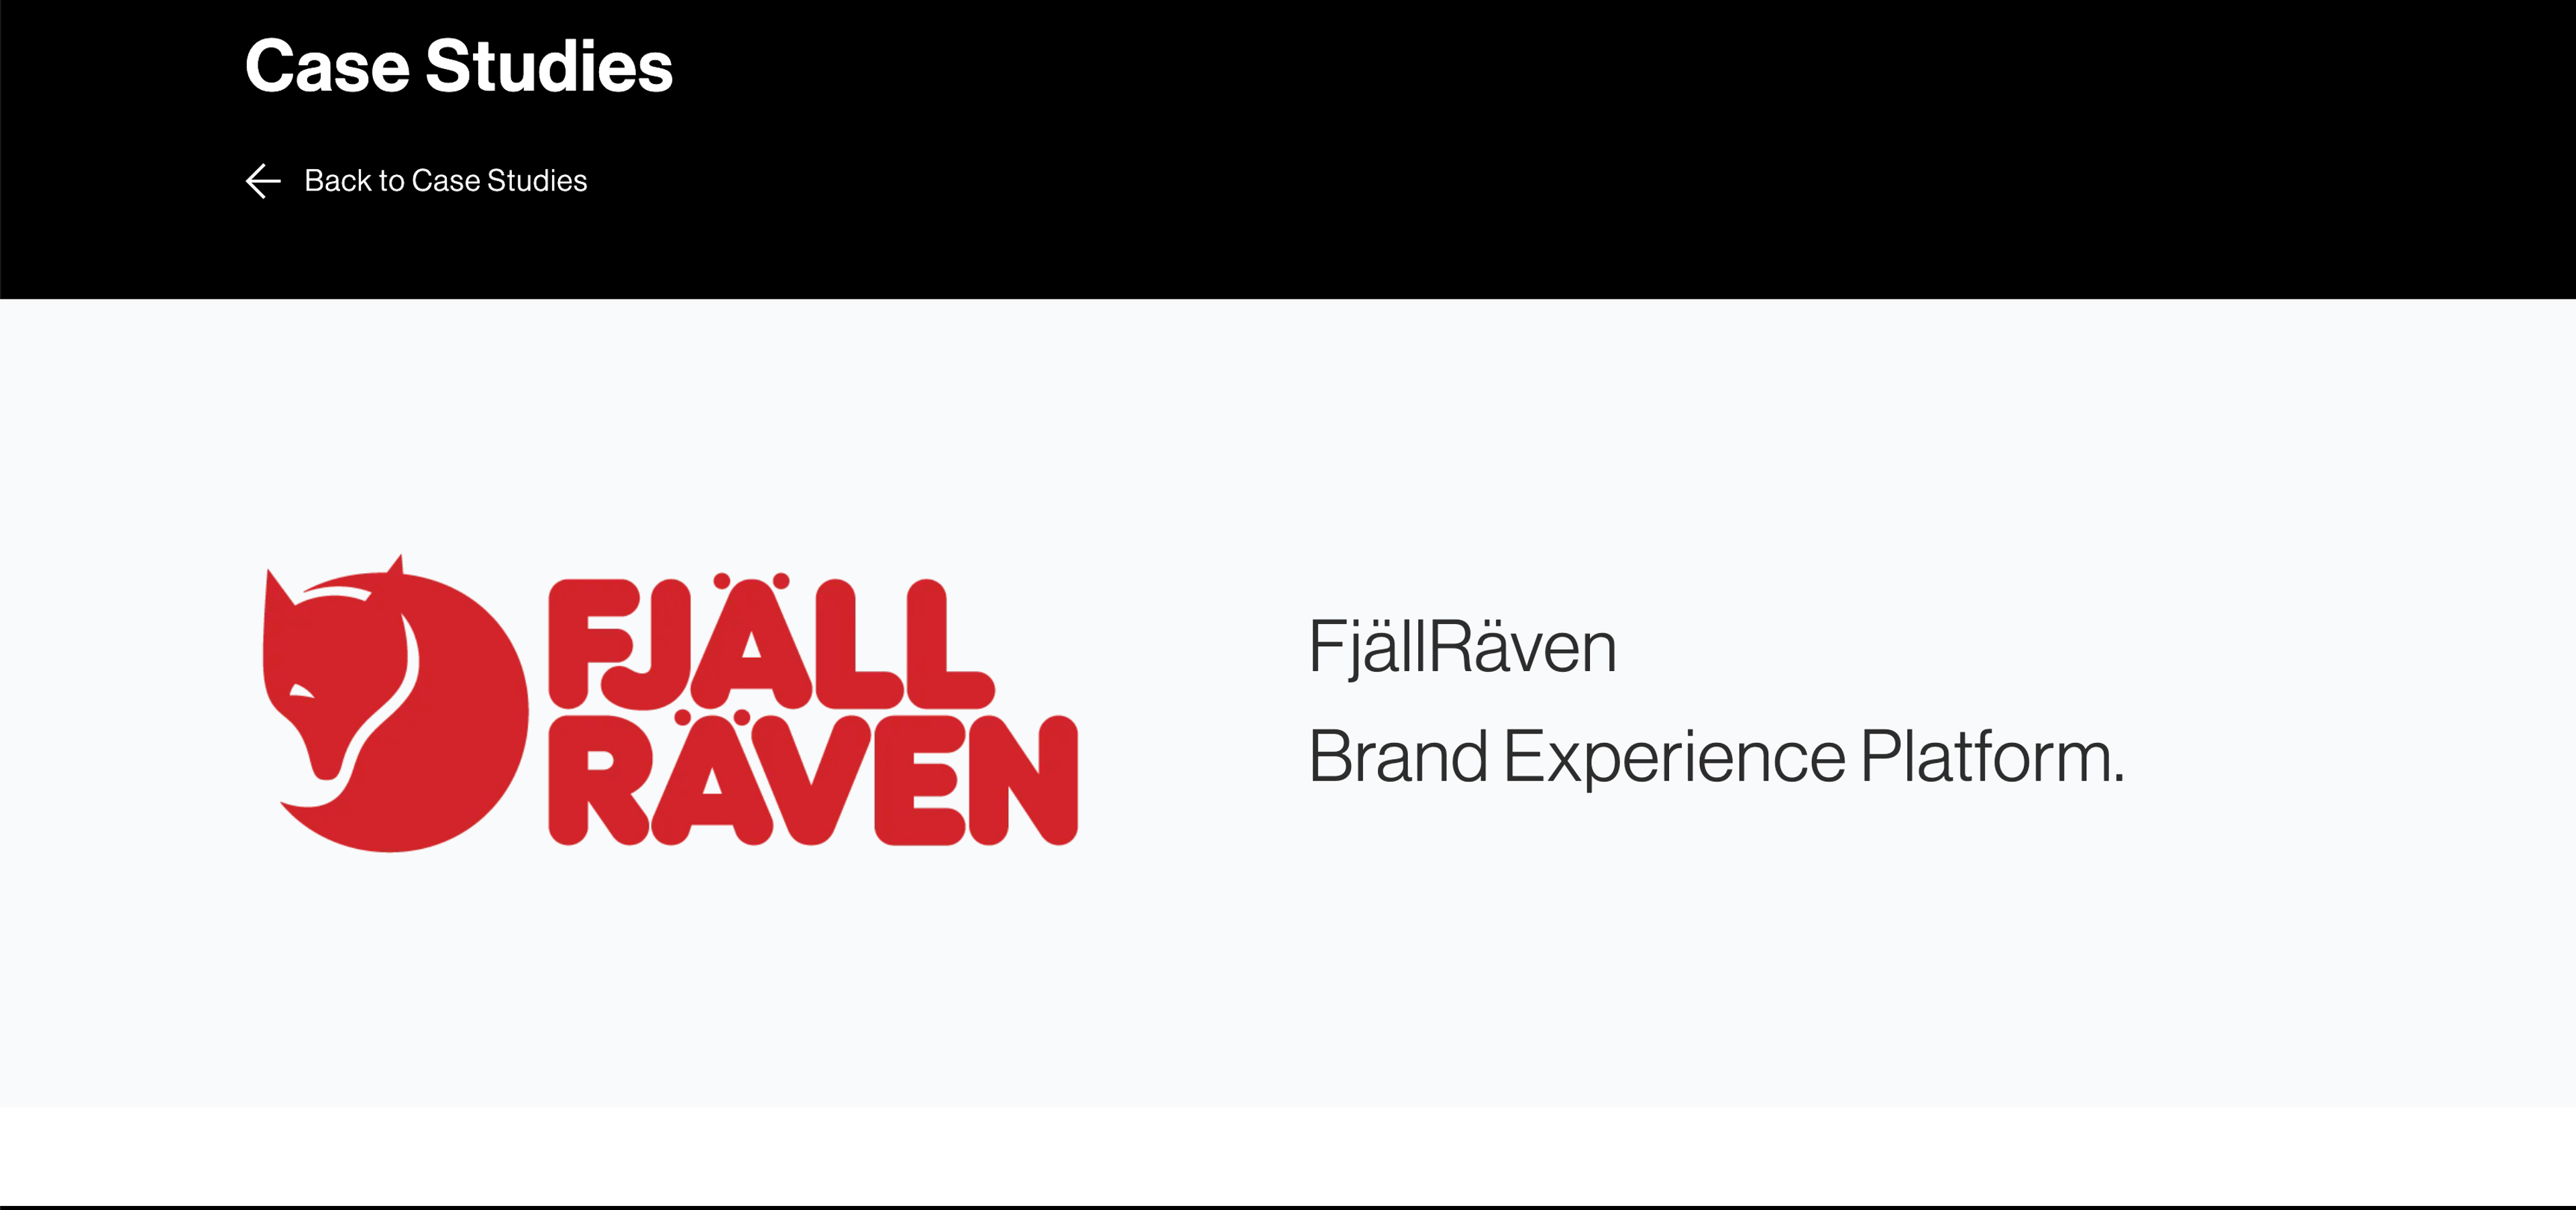 a case studies page for fjäll raven brand experience platform